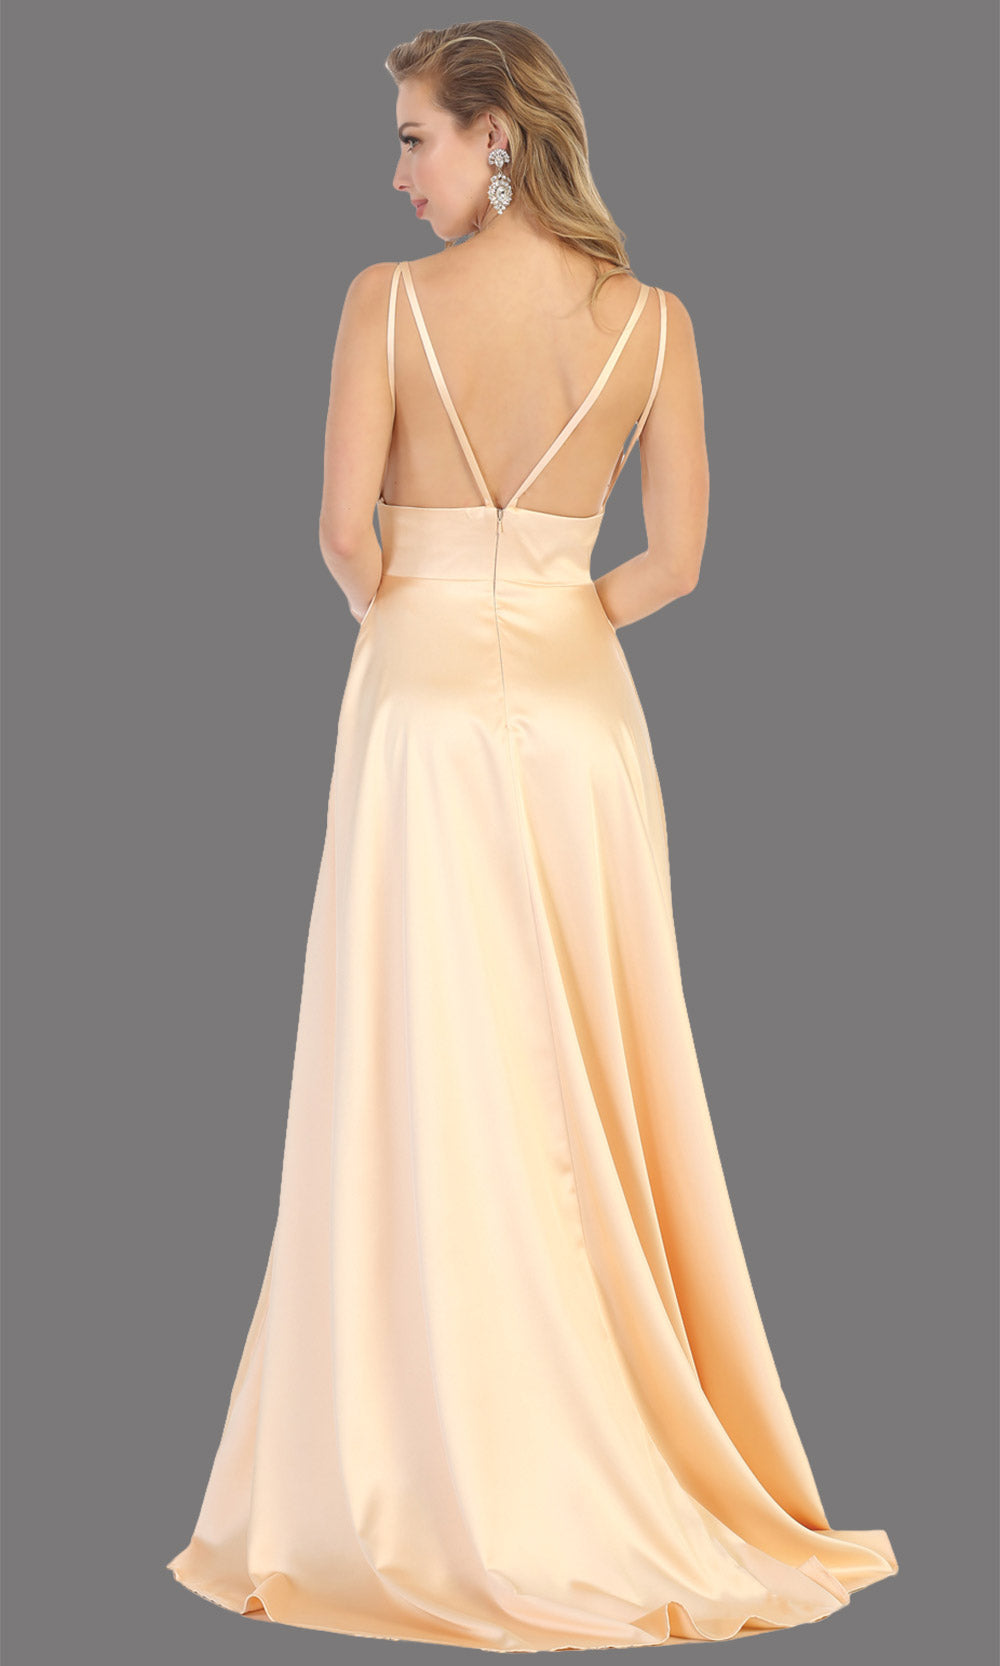 Mayqueen MQ1705 long champagne gold flowy satin dress with high slit and straps. This light gold dress is perfect for bridesmaid dresses, simple wedding guest dress, prom dress, gala, black tie wedding. Plus sizes are available, evening party dress-b.jpg